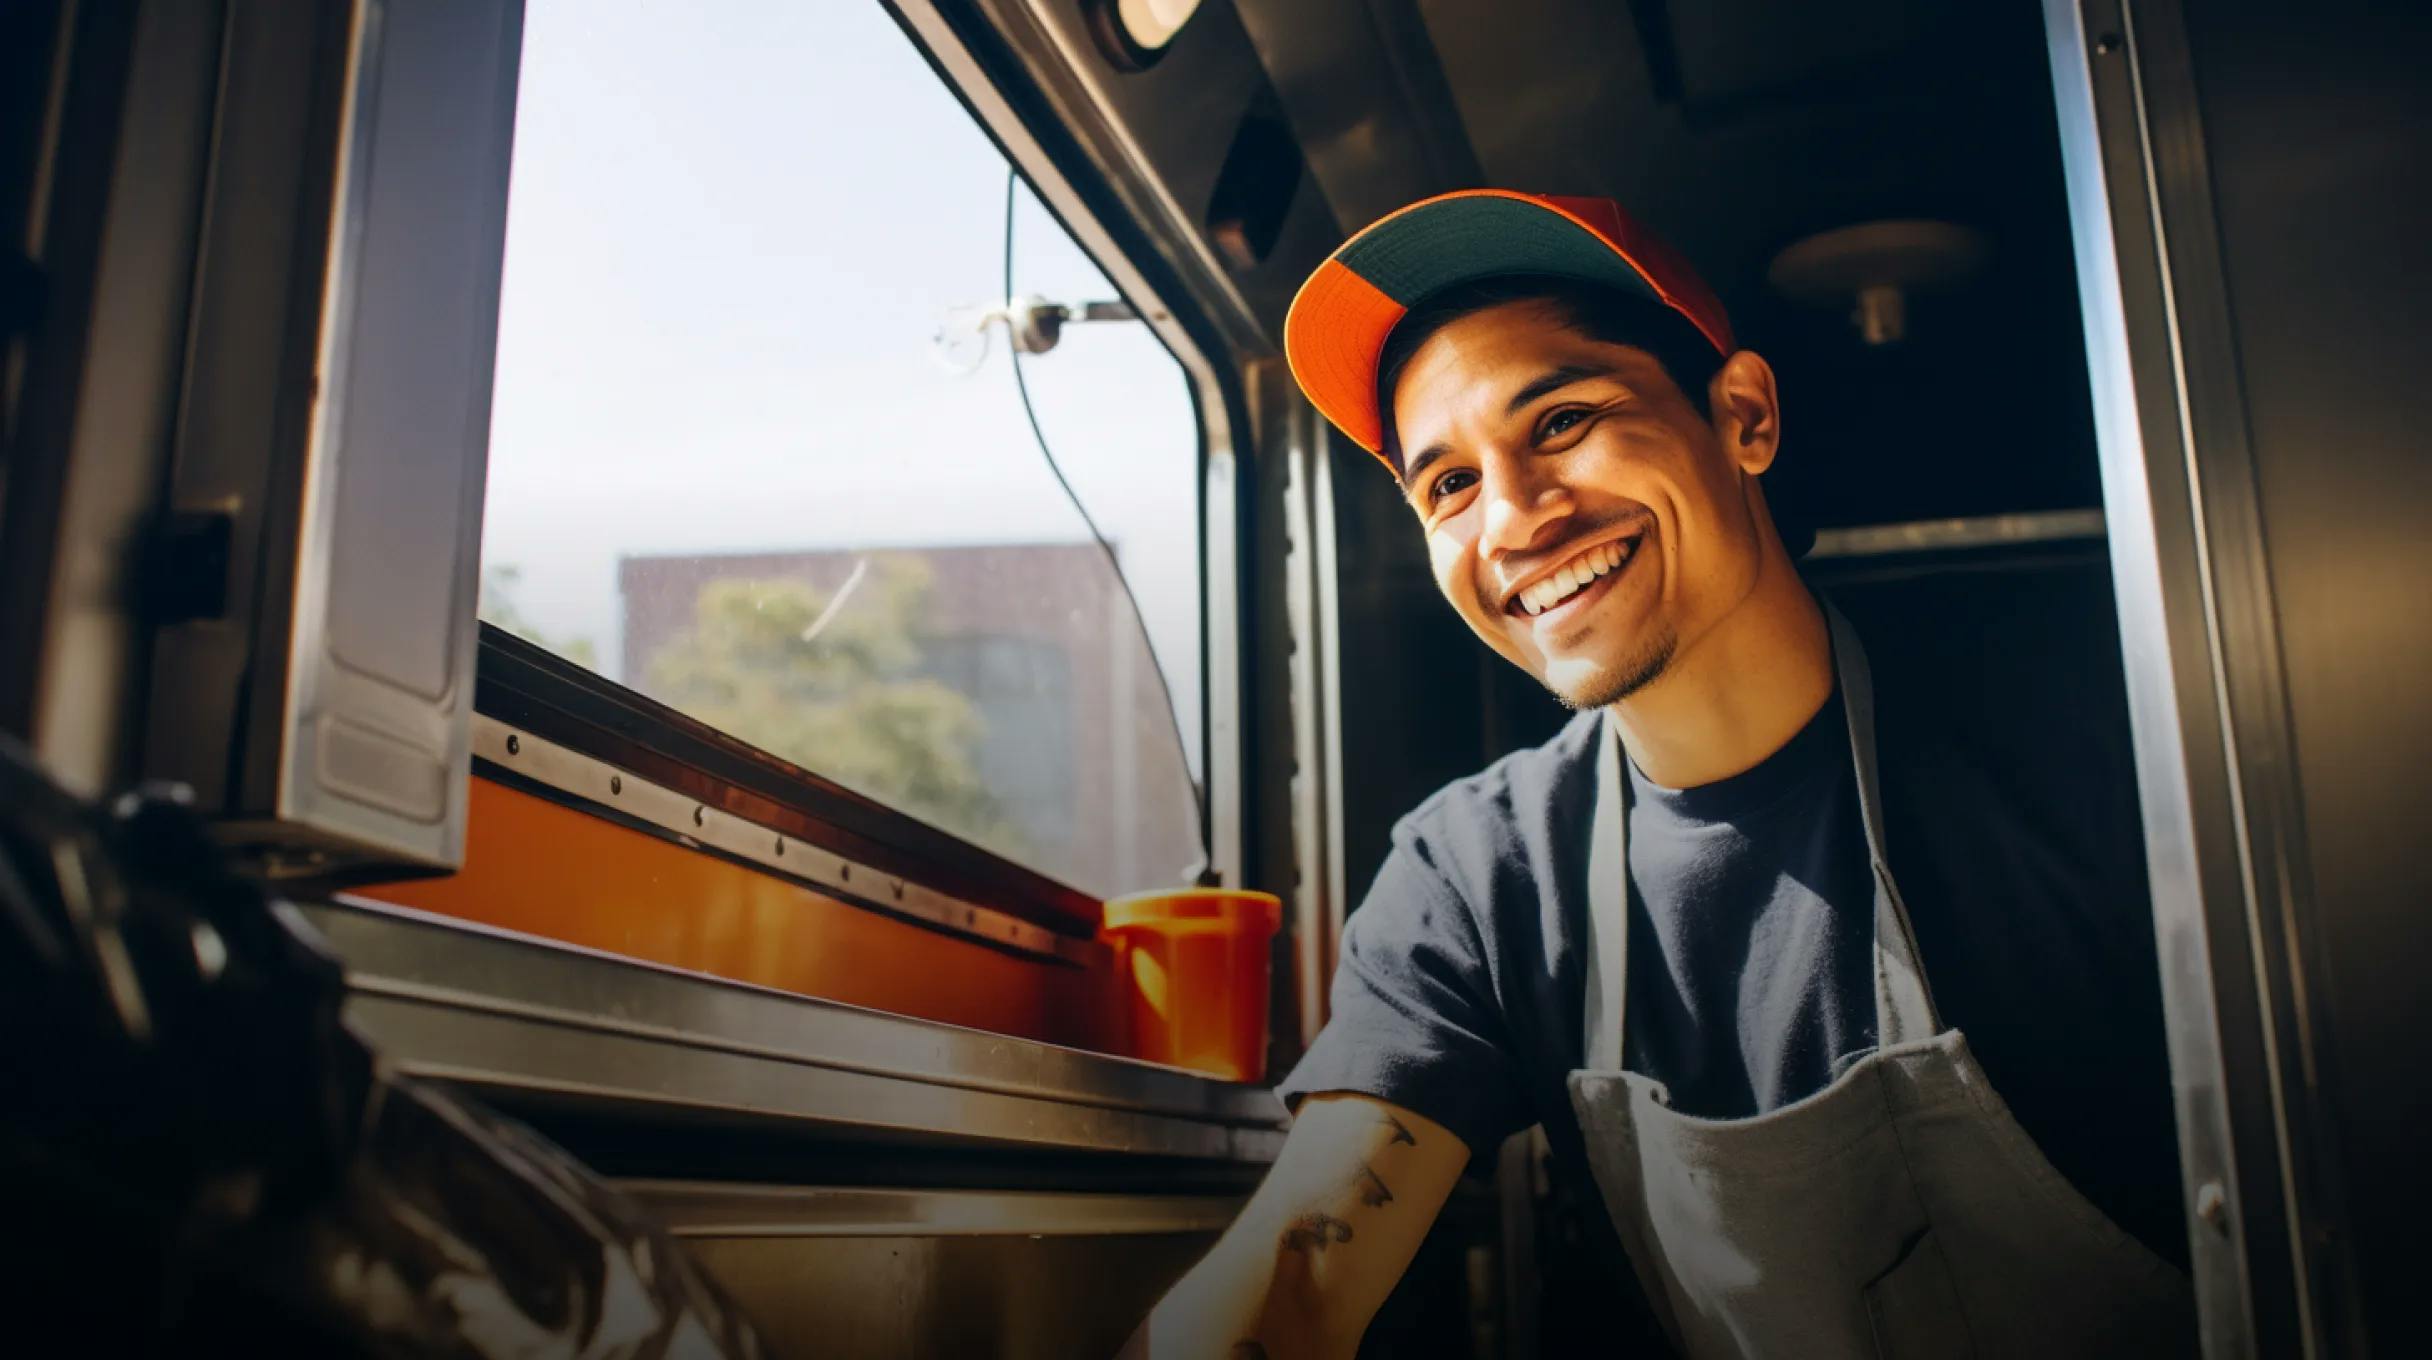 A young man sitting in a foodtruck serving food